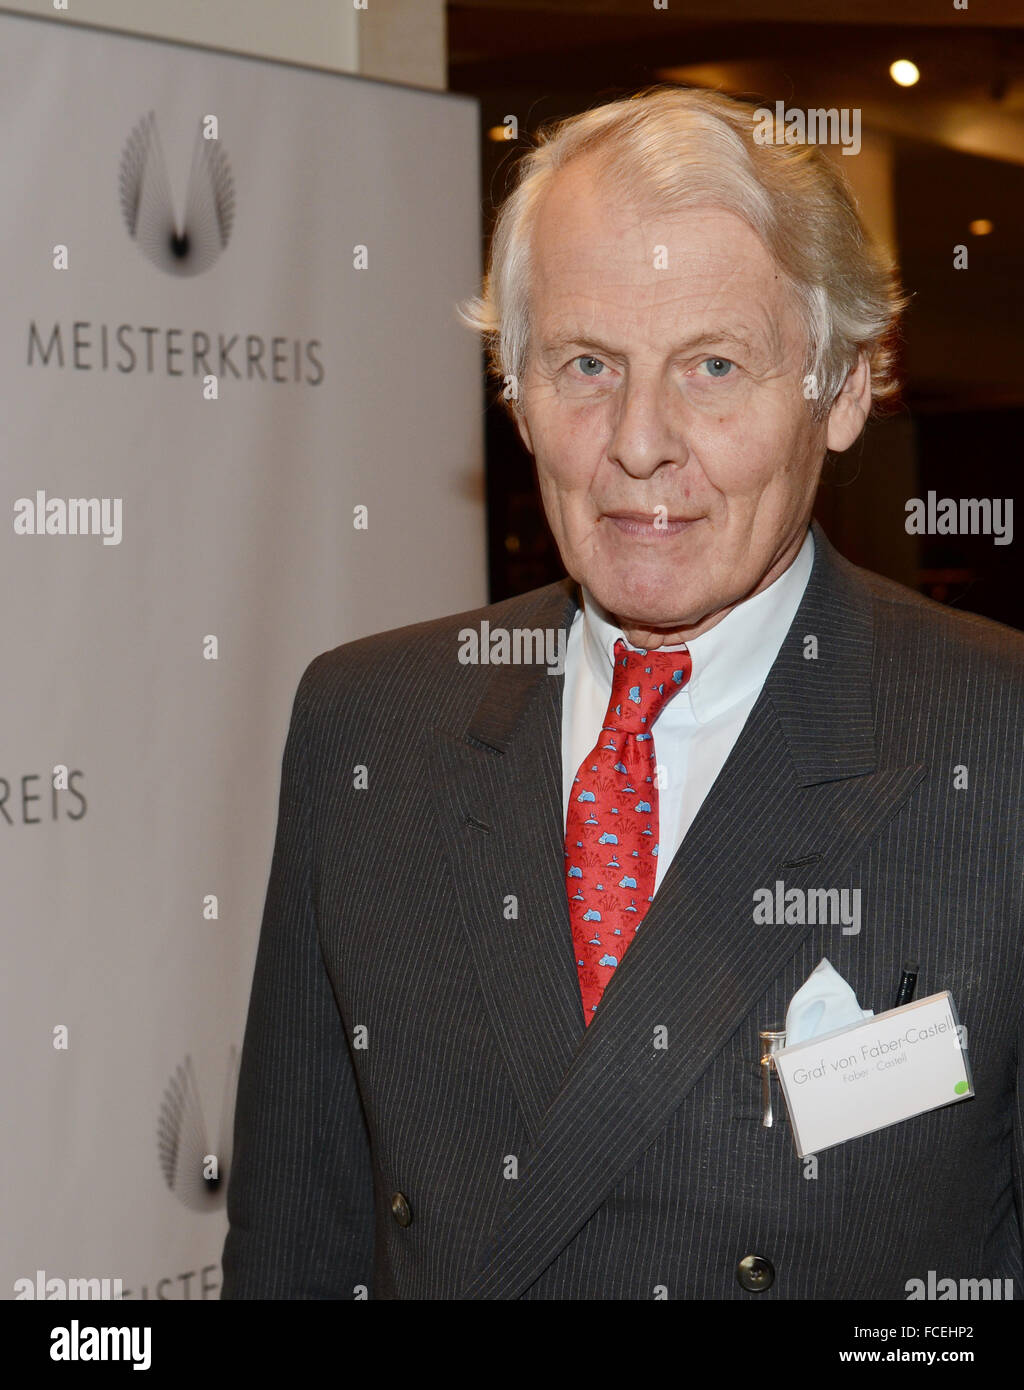 The chairman of stationary manufacturer Faber-Castell, Anton Wolfgang Count Faber  von Castell, arrives for a reception of the German association of luxury  producers 'Meisterkreis' at the Adlon hotel in Berlin, germany, 27